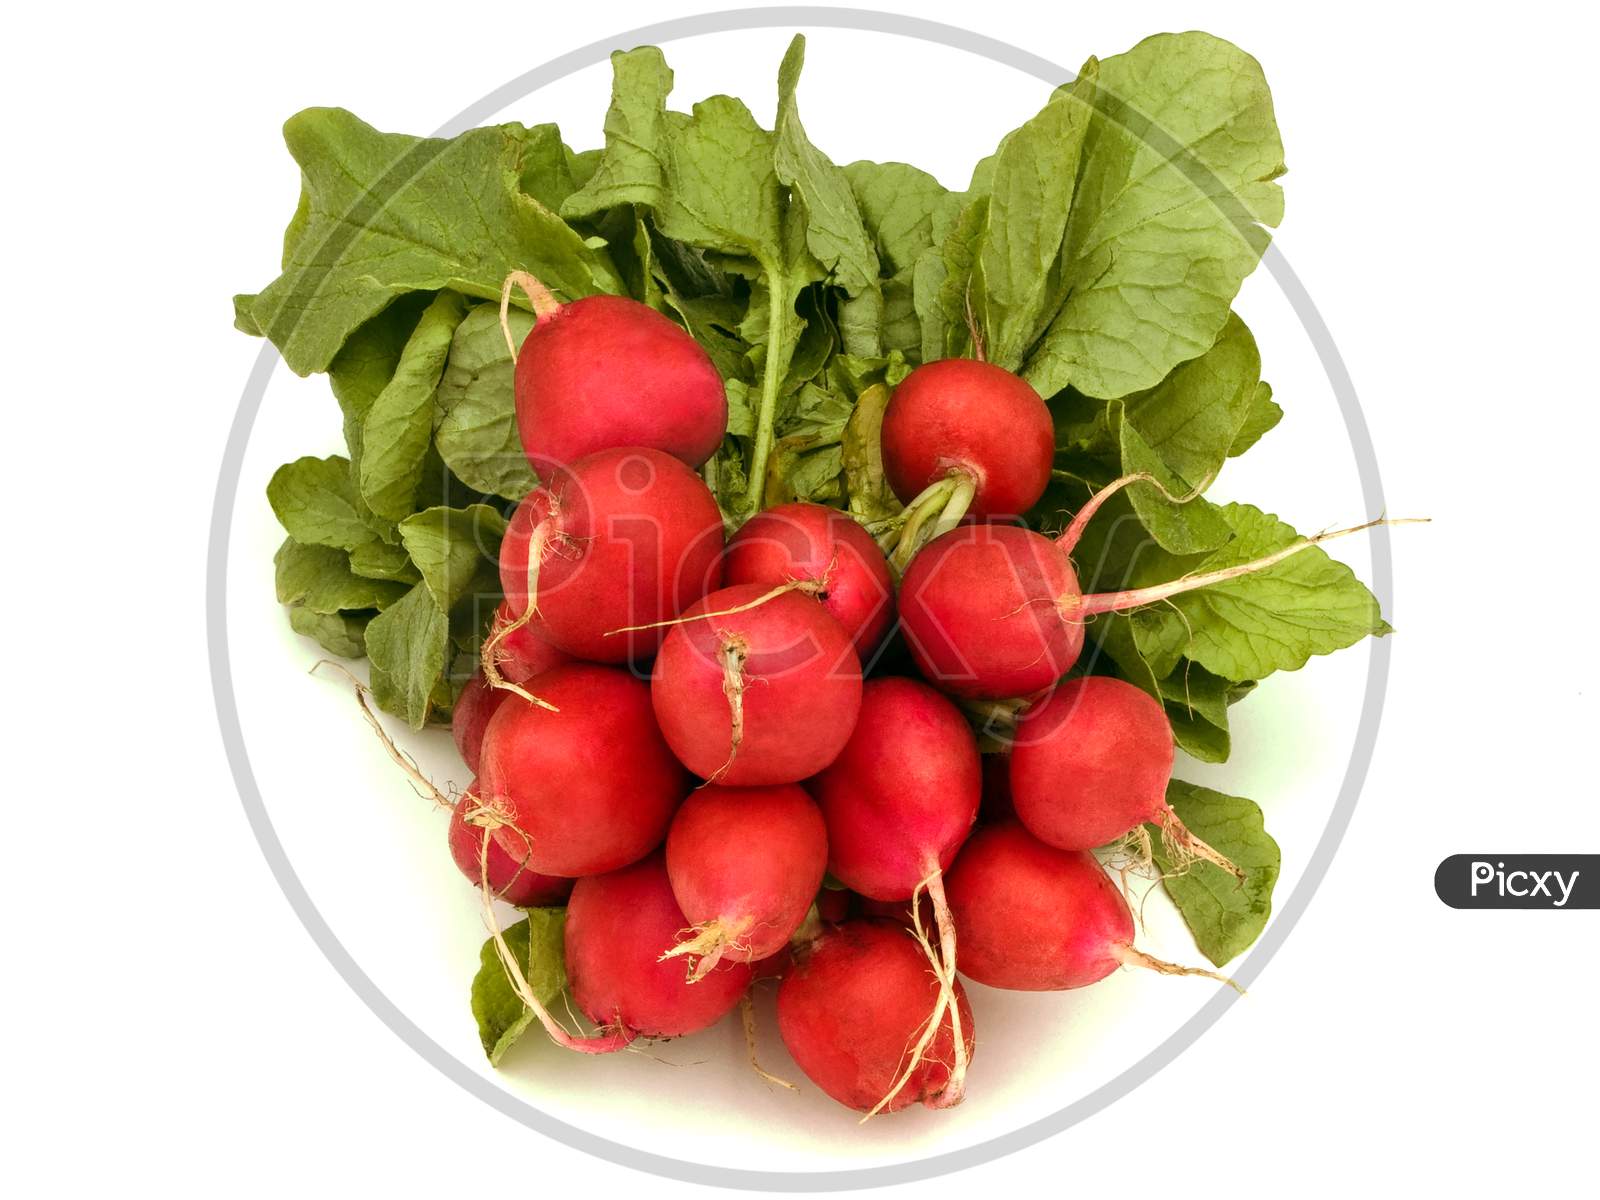 A bunch of radishes set on a white background.